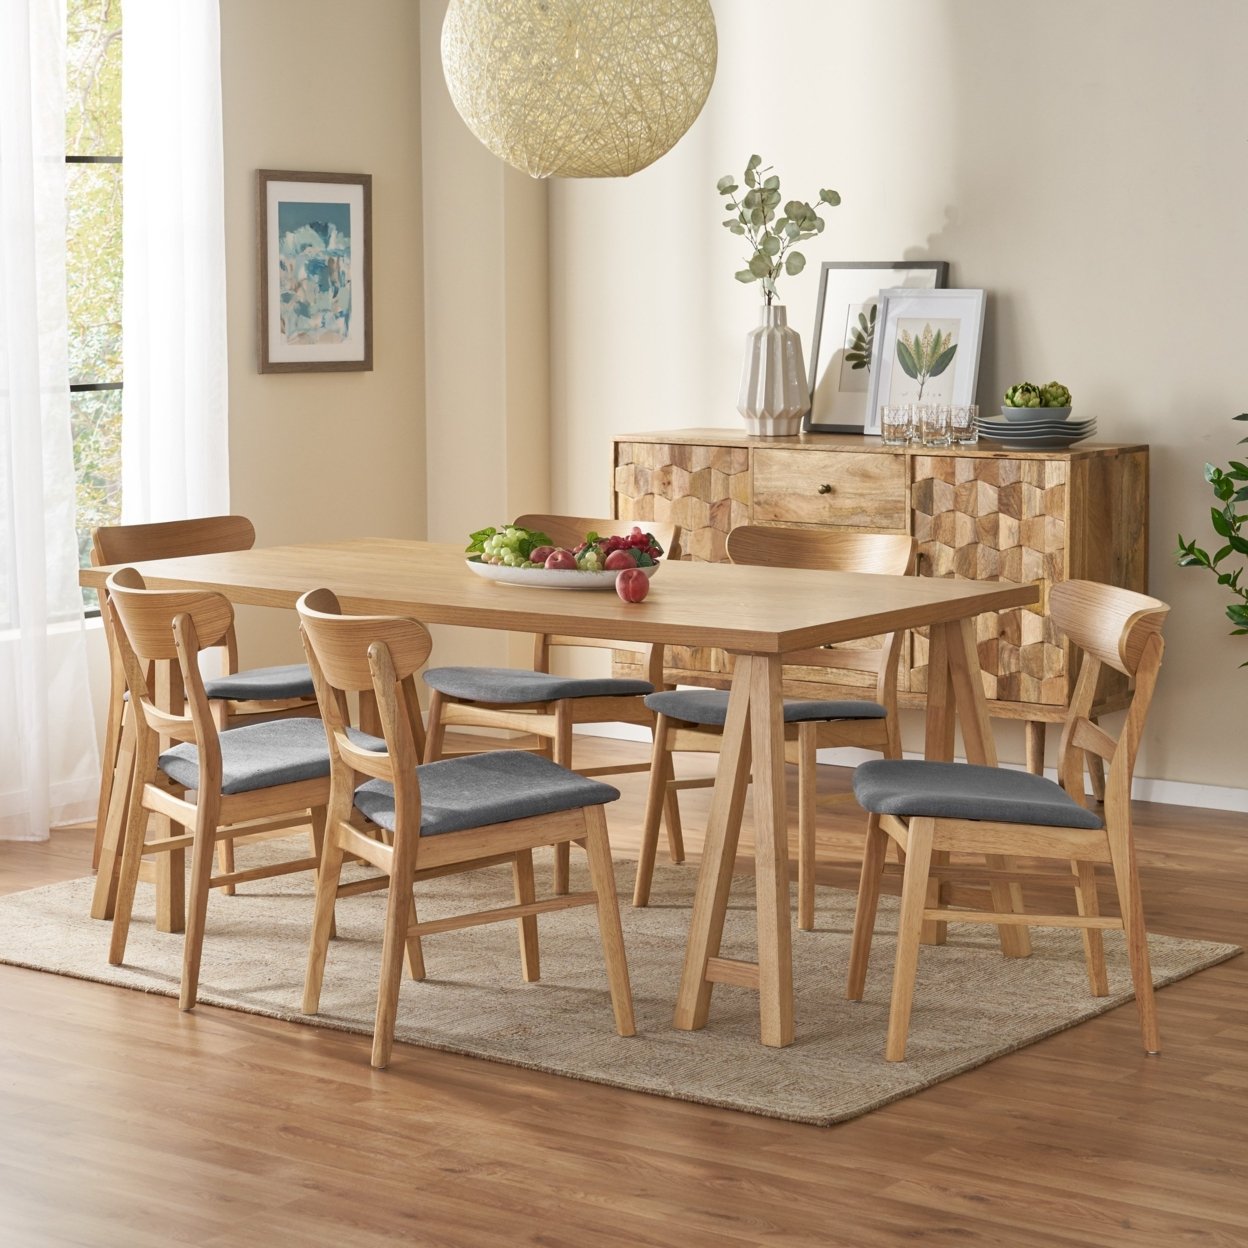 Randal Mid-Century Modern 7 Piece Dining Set With A-Frame Table - Natural Oak/light Beige